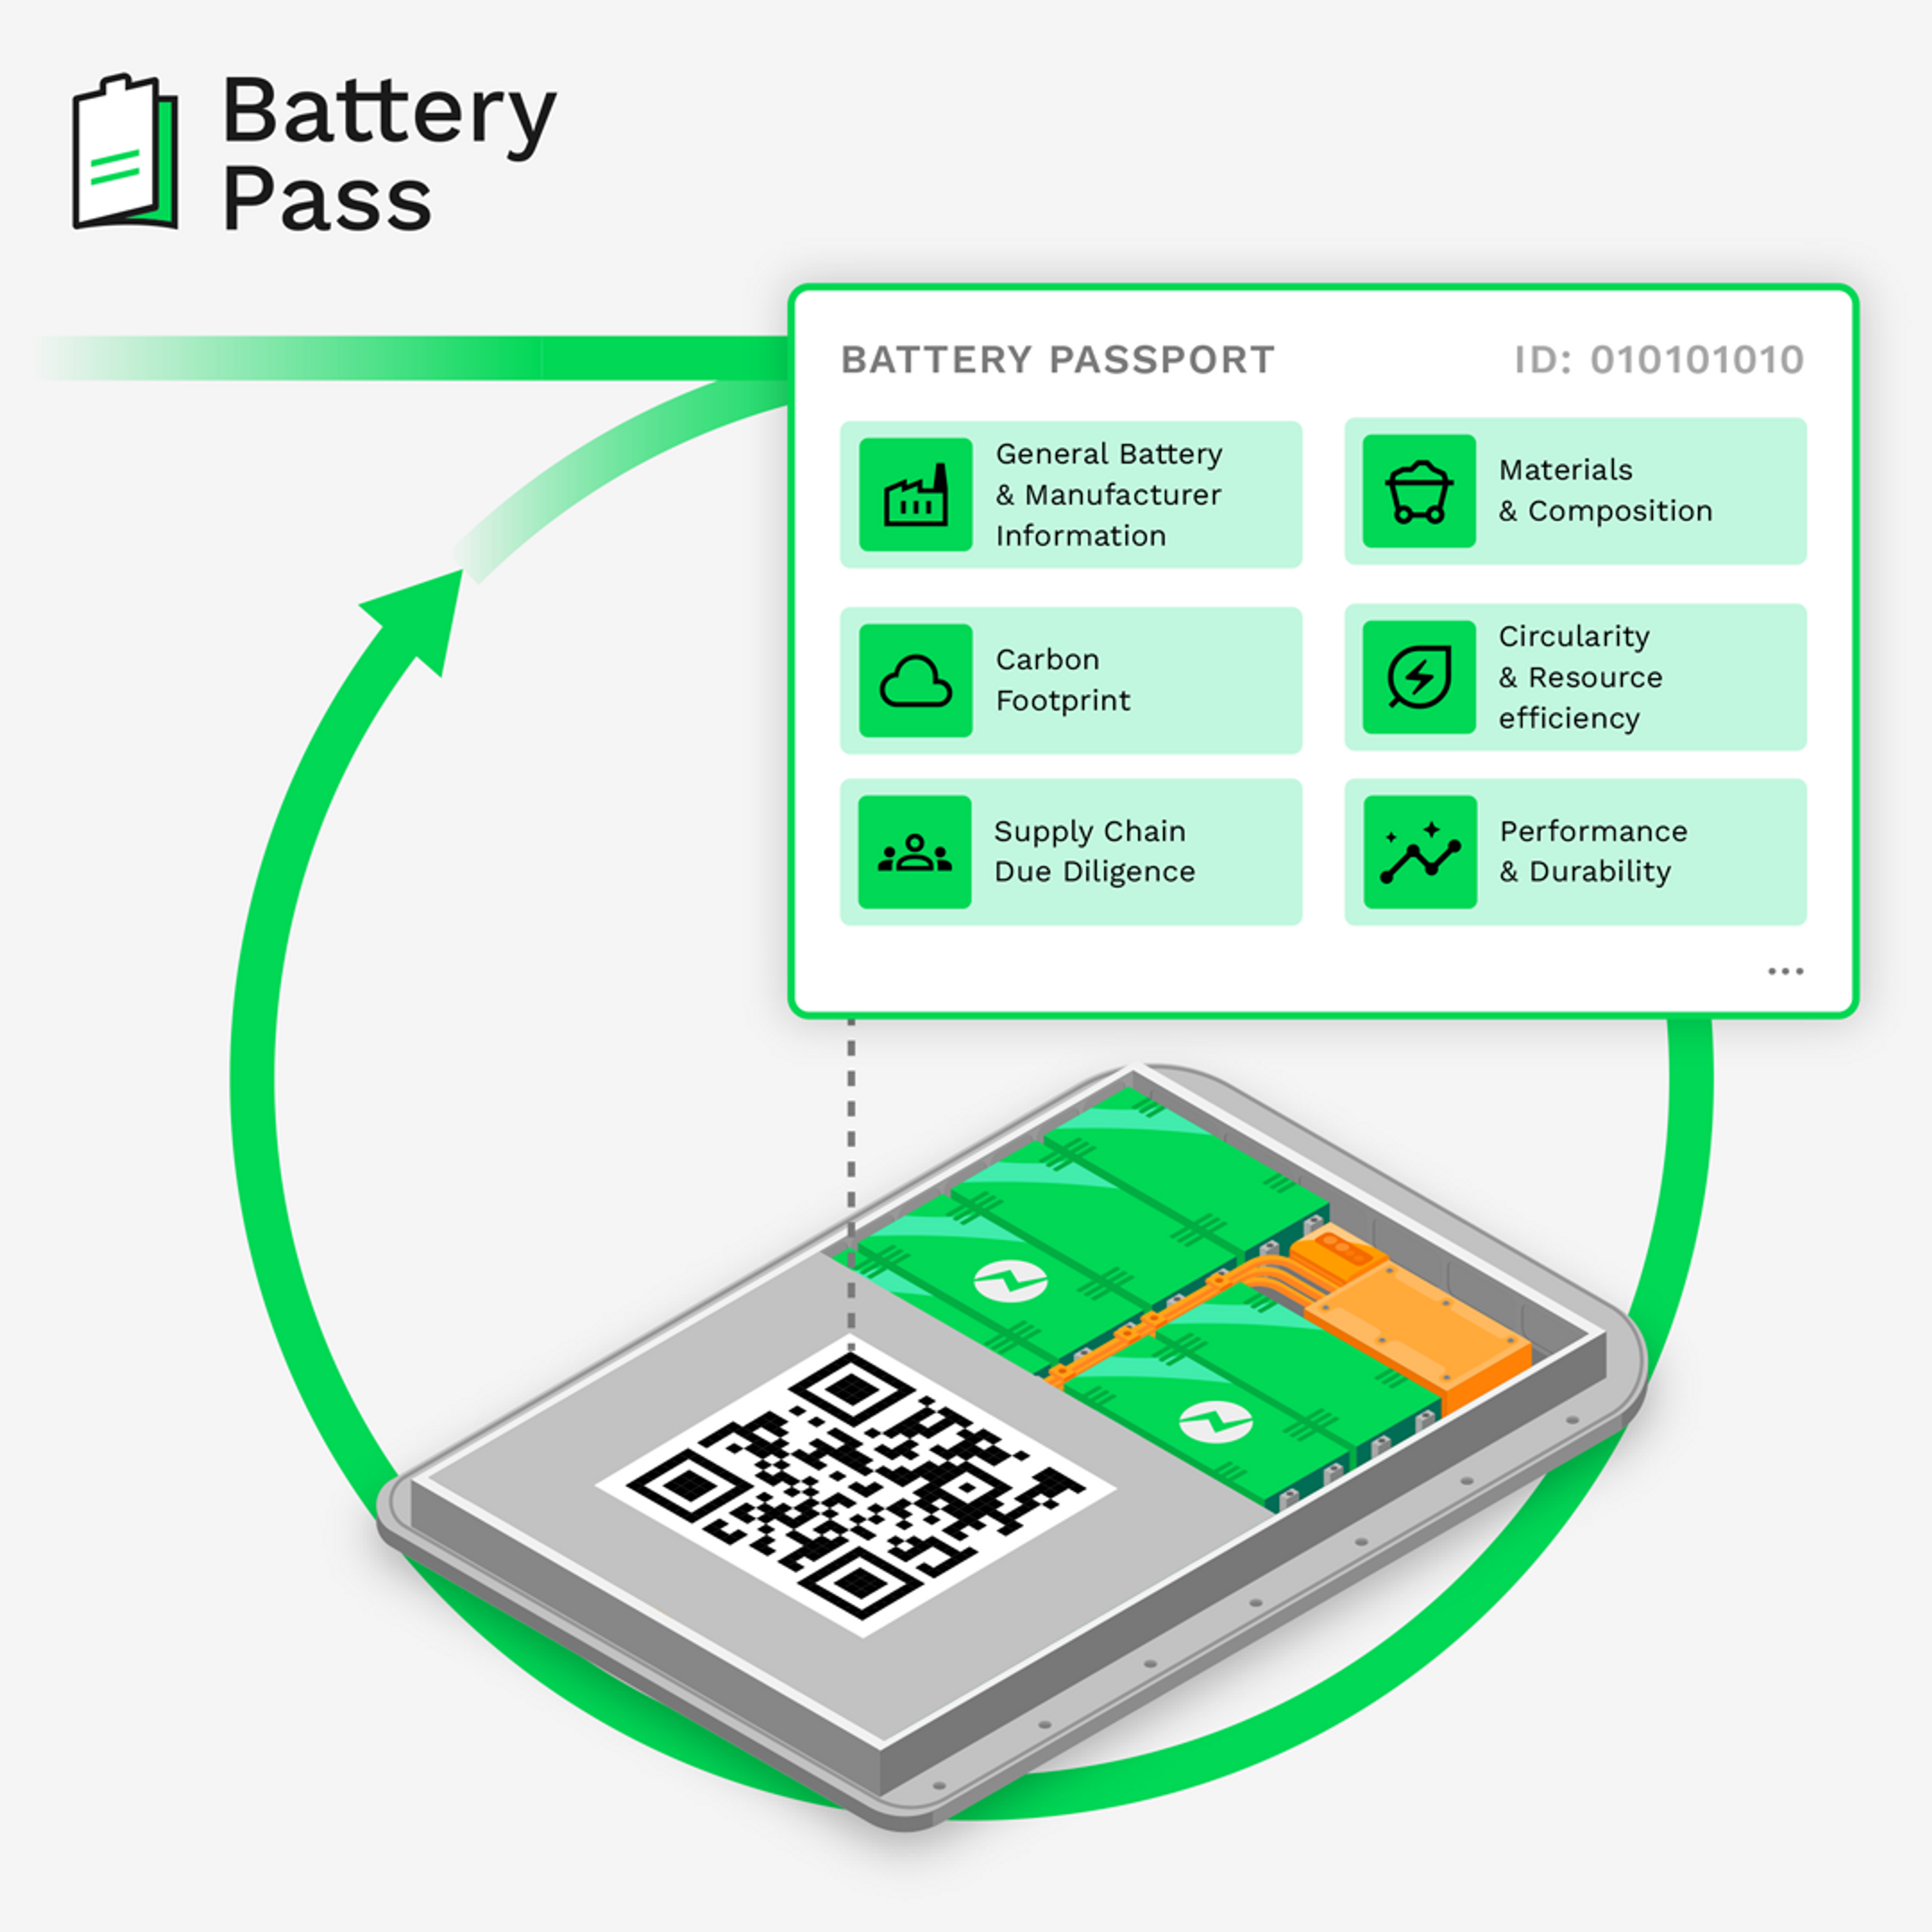 By 2027, all EV and industrial batteries require a unique battery passport.